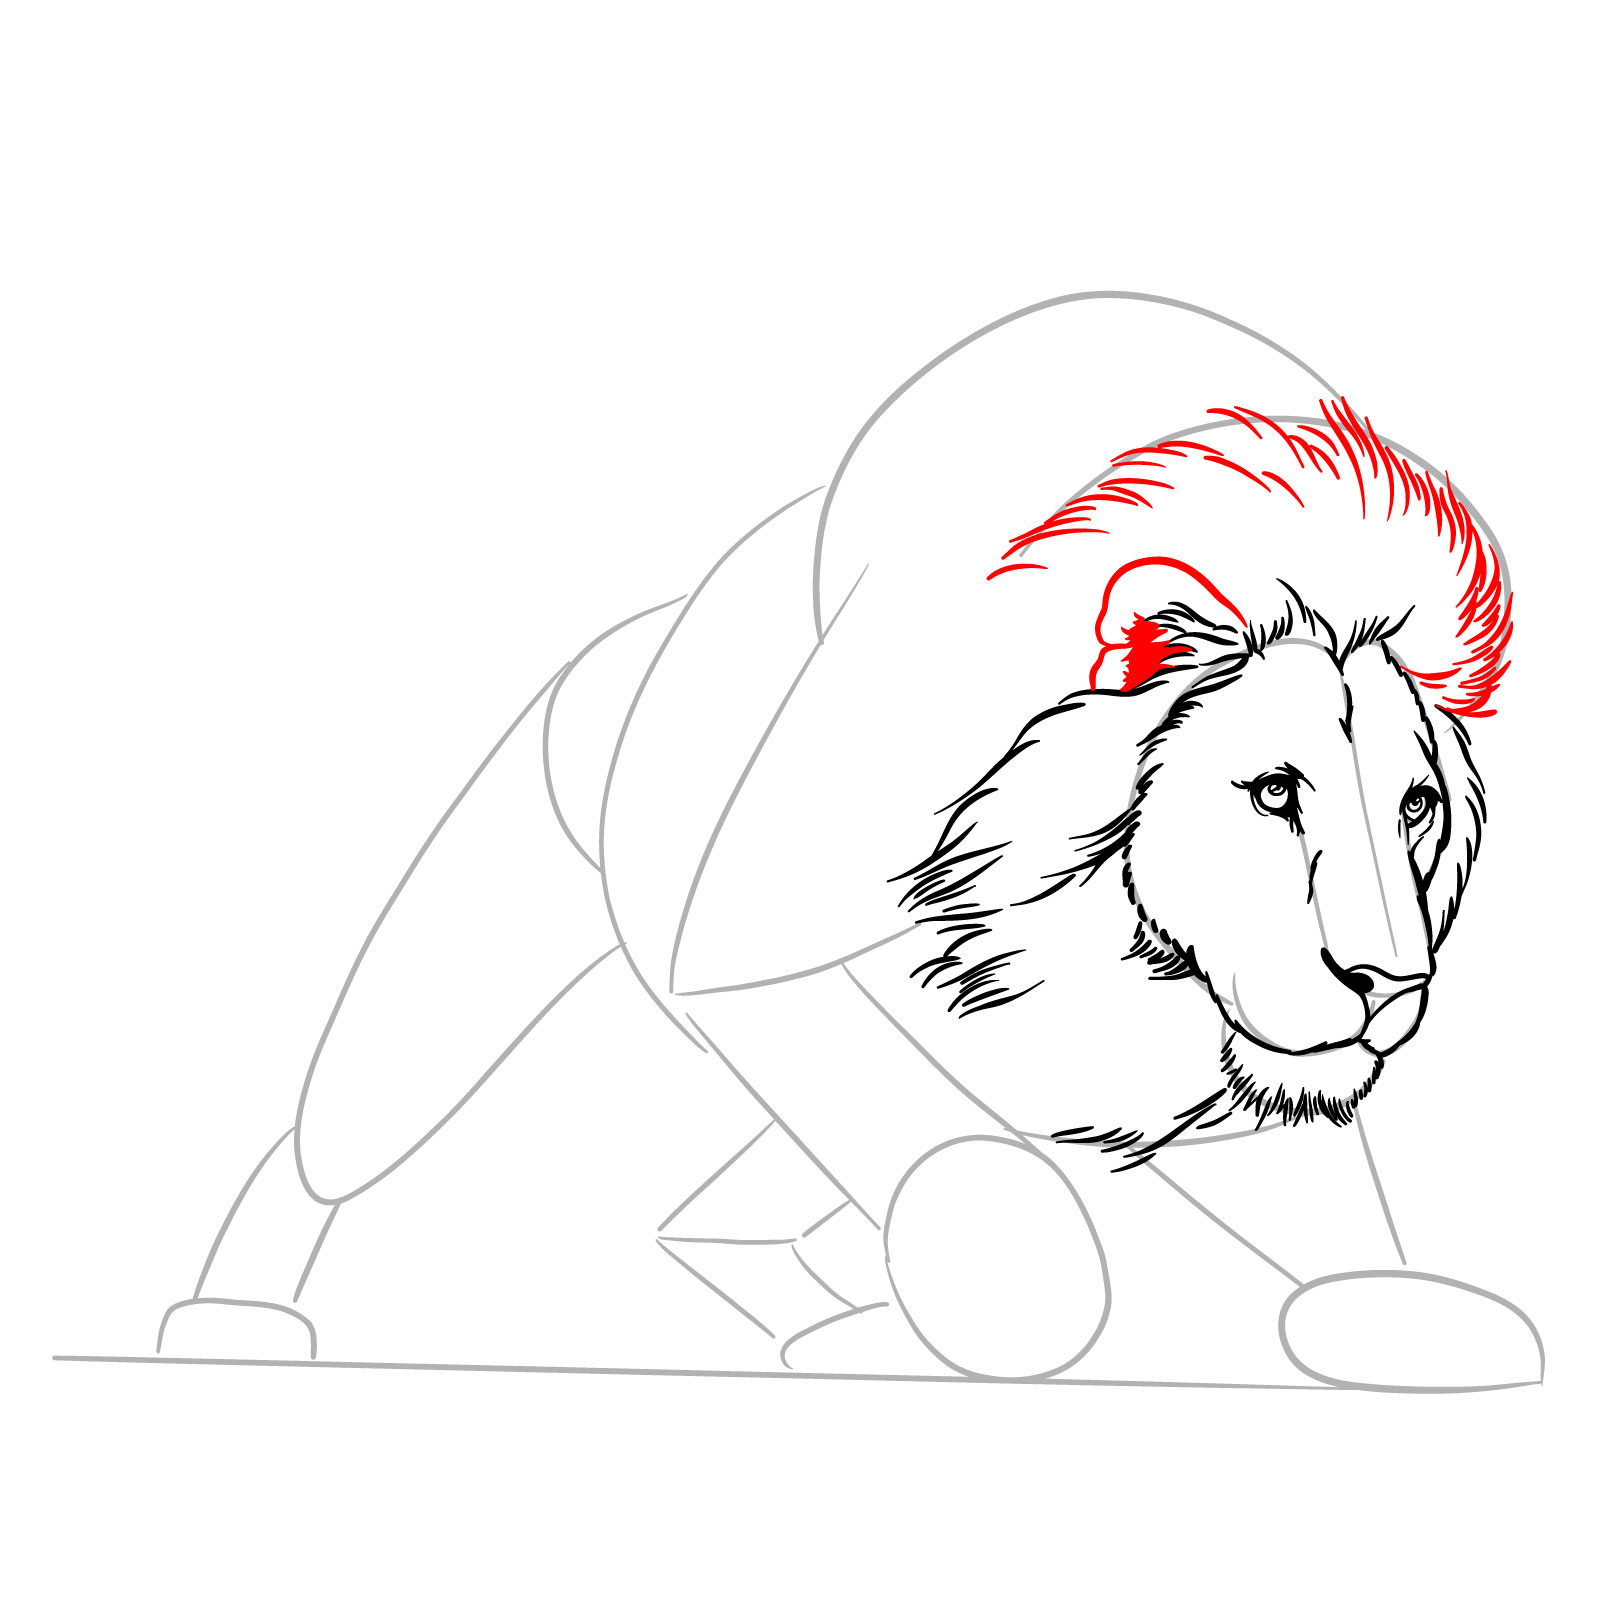 Hunting lion drawing - Step 10: Ear and mane above the head